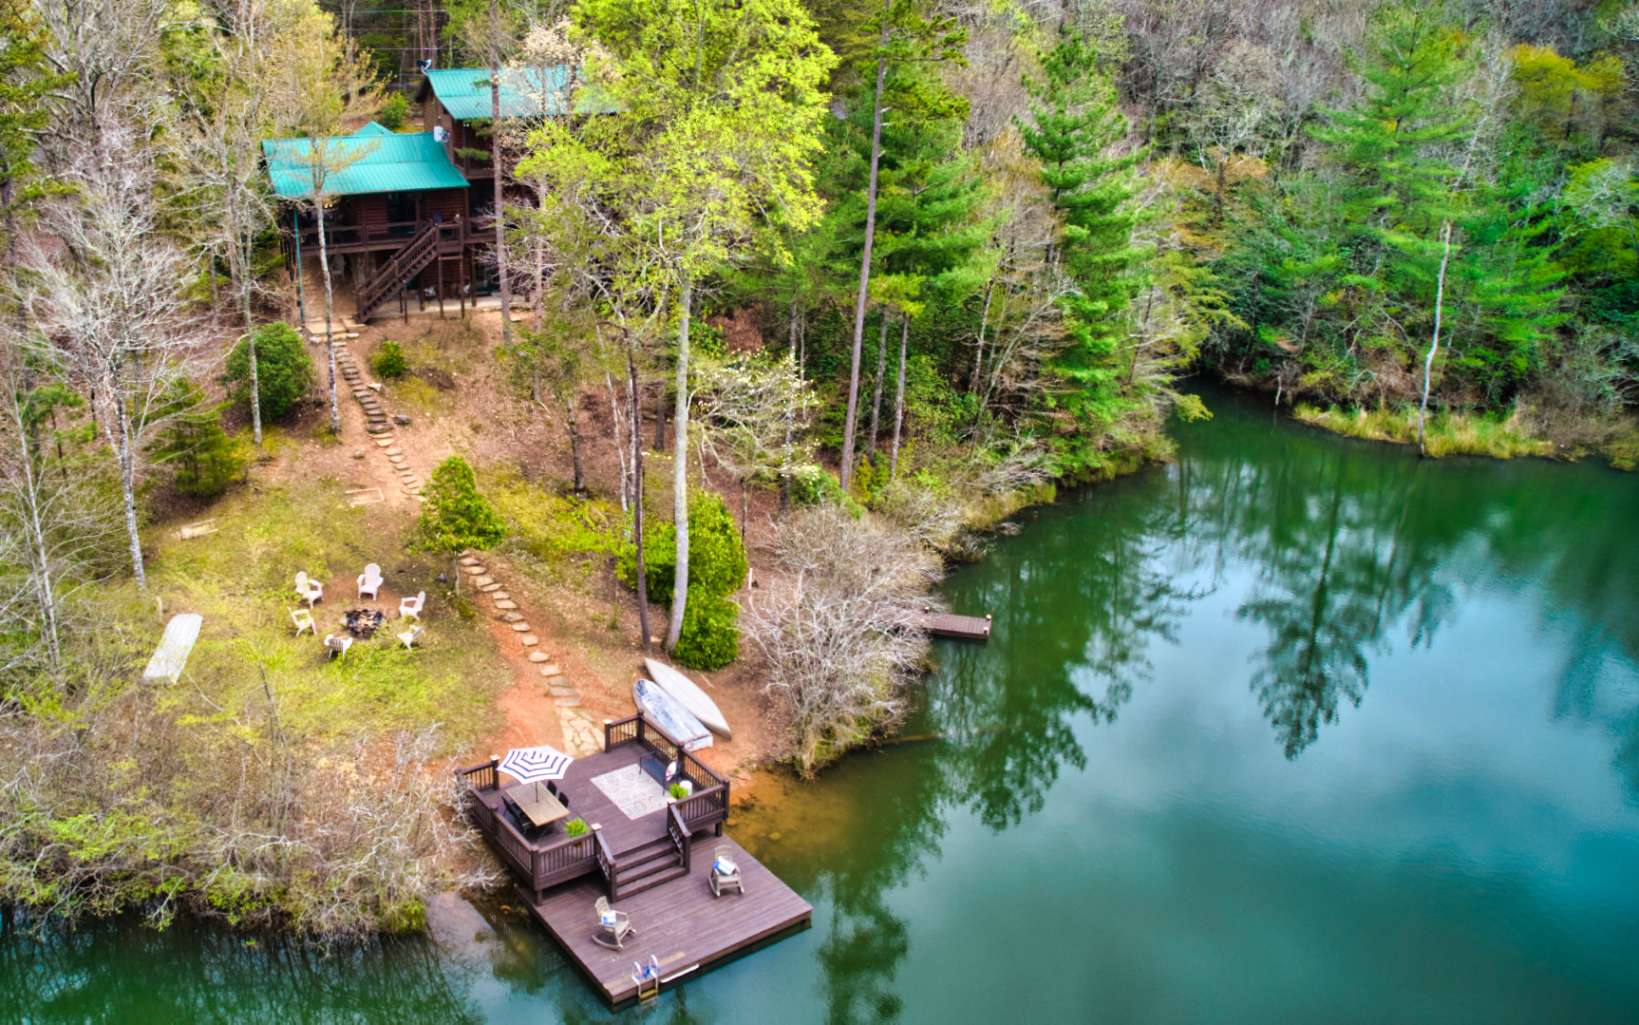 Back on the market at no fault of the sellers. Your own personal LAKEFRONT PARADISE awaits you in the N Ga Mountains! This cabin sits on a 4 AC lake minutes away from DT Blue Ridge and has absolutely everything you’re looking for! A large two level dock, separate fishing dock,3 levels of outdoor living space, more than 1,000sq ft of freshly stained wrap around porches, a wet bar, hot tub, even an outdoor shower. The cabin is being sold turn key, fully furnished and sleeps 8 comfortably. This beauty has a Gross Rental Booking history of over $80k, just in its first year. Spectacular three-level home has a huge living room with a floor-to-ceiling stone fireplace, separate dining area, amazing stairway w/custom-made mountain laurel balusters, a stone archway entry to the kitchen, stainless steel appliances, granite countertops, farmhouse kitchen sink, and wide plank pine wood floors. Master bedroom has a fireplace, sitting area, private balcony, and walk-in closet. 2 more roomy bedrooms in the finished walkout basement along w/ fireplace, media/family room, and game table area. Be ready to spend lots of time on the two lake docks. Go canoeing, paddleboarding, swimming, and fishing! Roast marshmallows at the firepit or just relax and take in the spectacular sunset views. Terrific rental history and still on a very active rental program! Start making a return on your investment today!